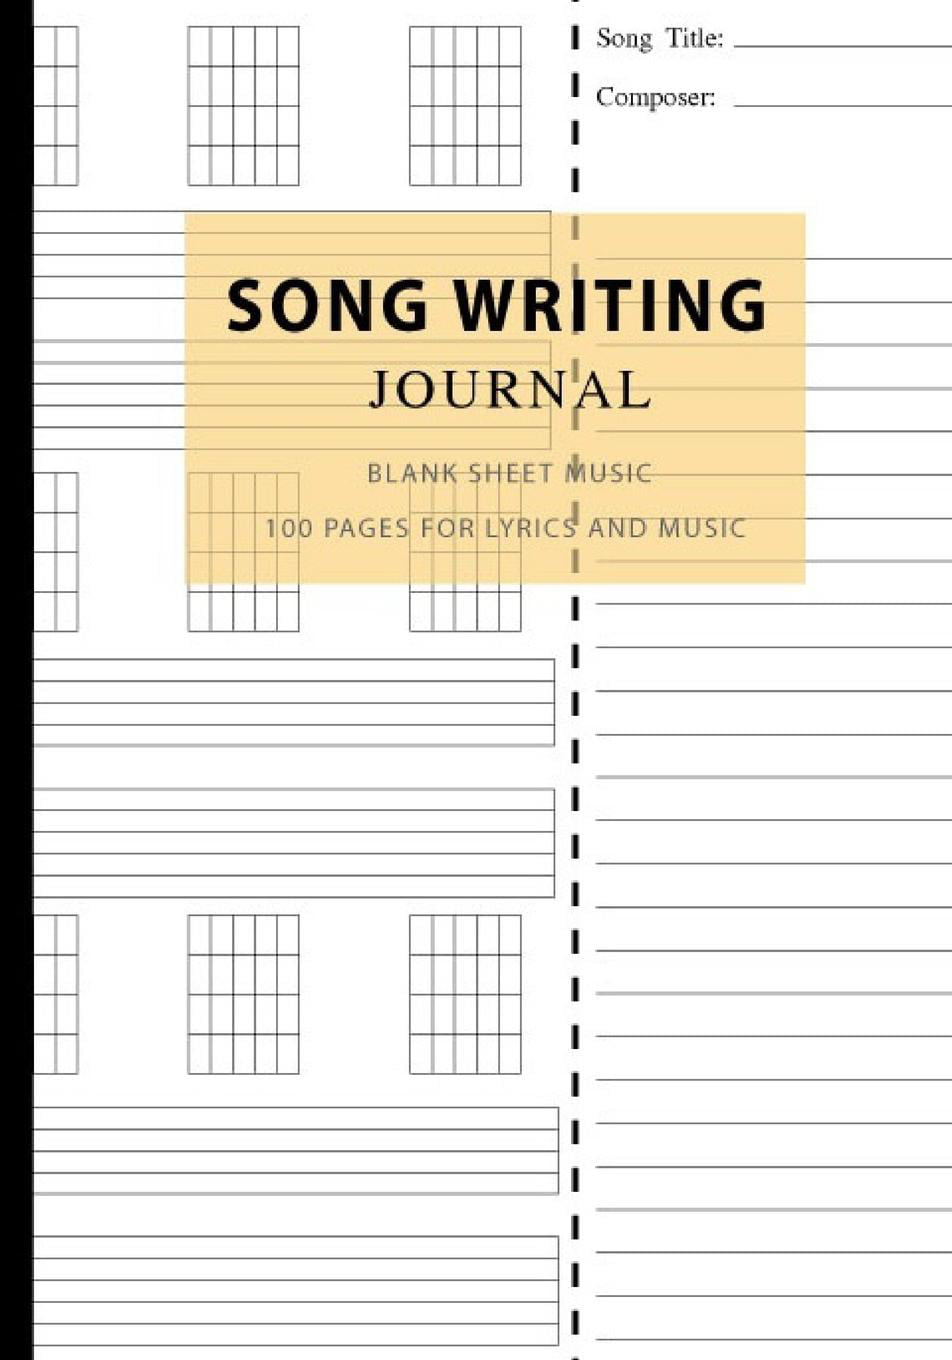 song-writing-journal-blank-sheet-music-100-pages-for-lyrics-and-music